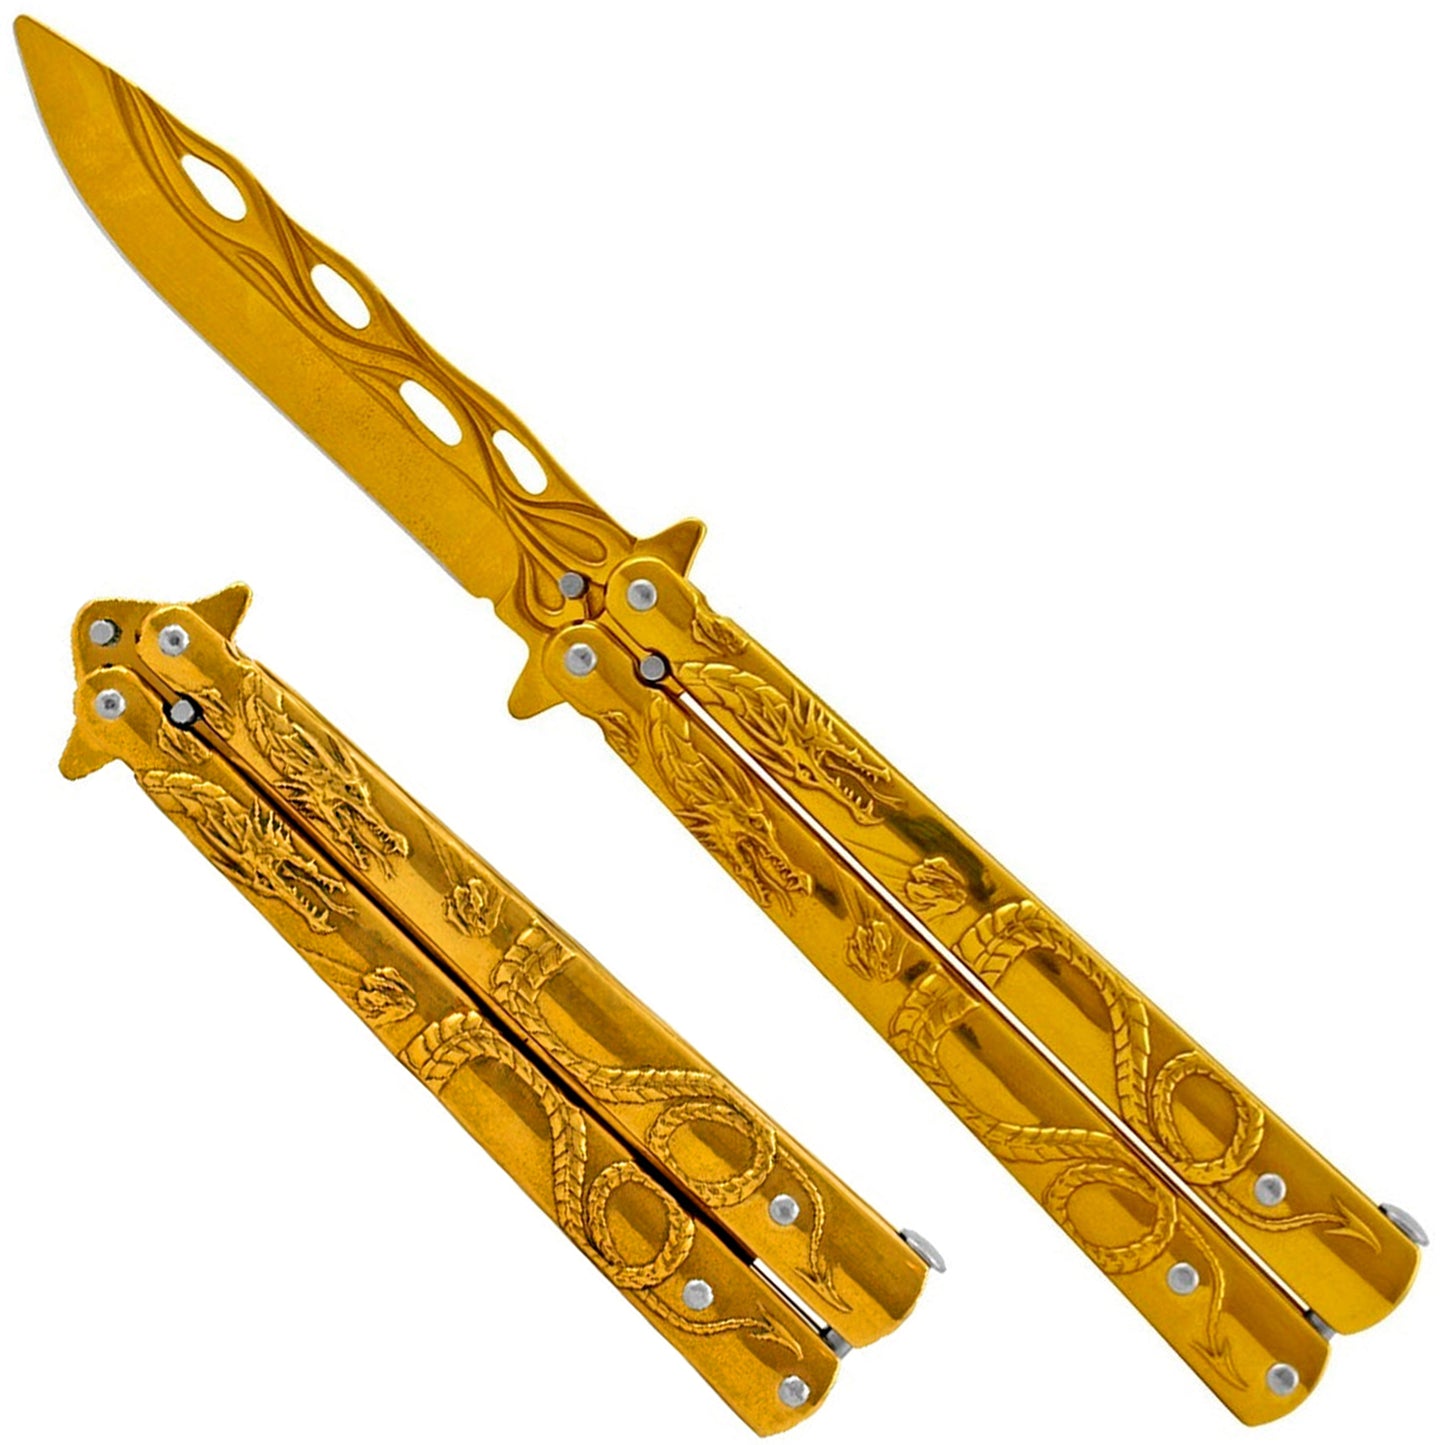 8" Overall Practice Butterfly Knife w/Dragon Engraved Handle Gold